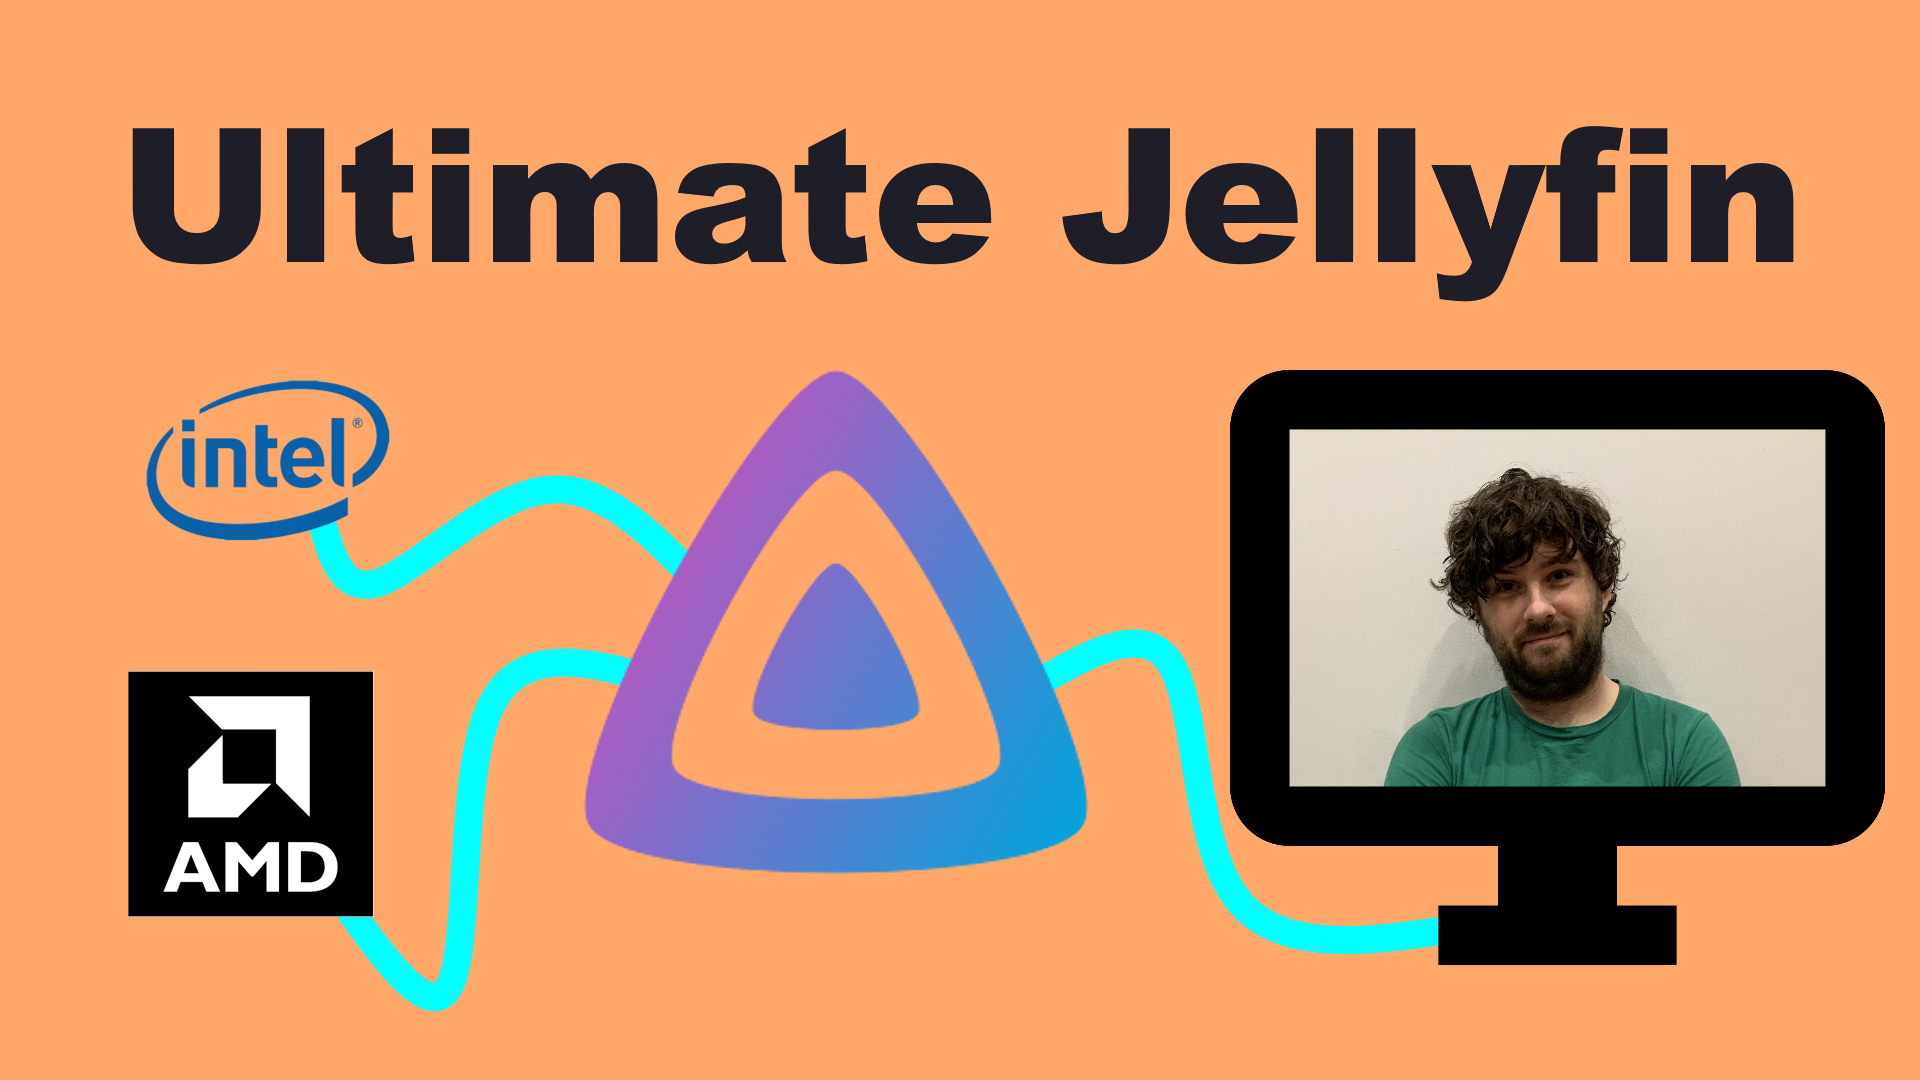 Manage your Media Collection with Jellyfin! Install on Proxmox with Hardware Transcode